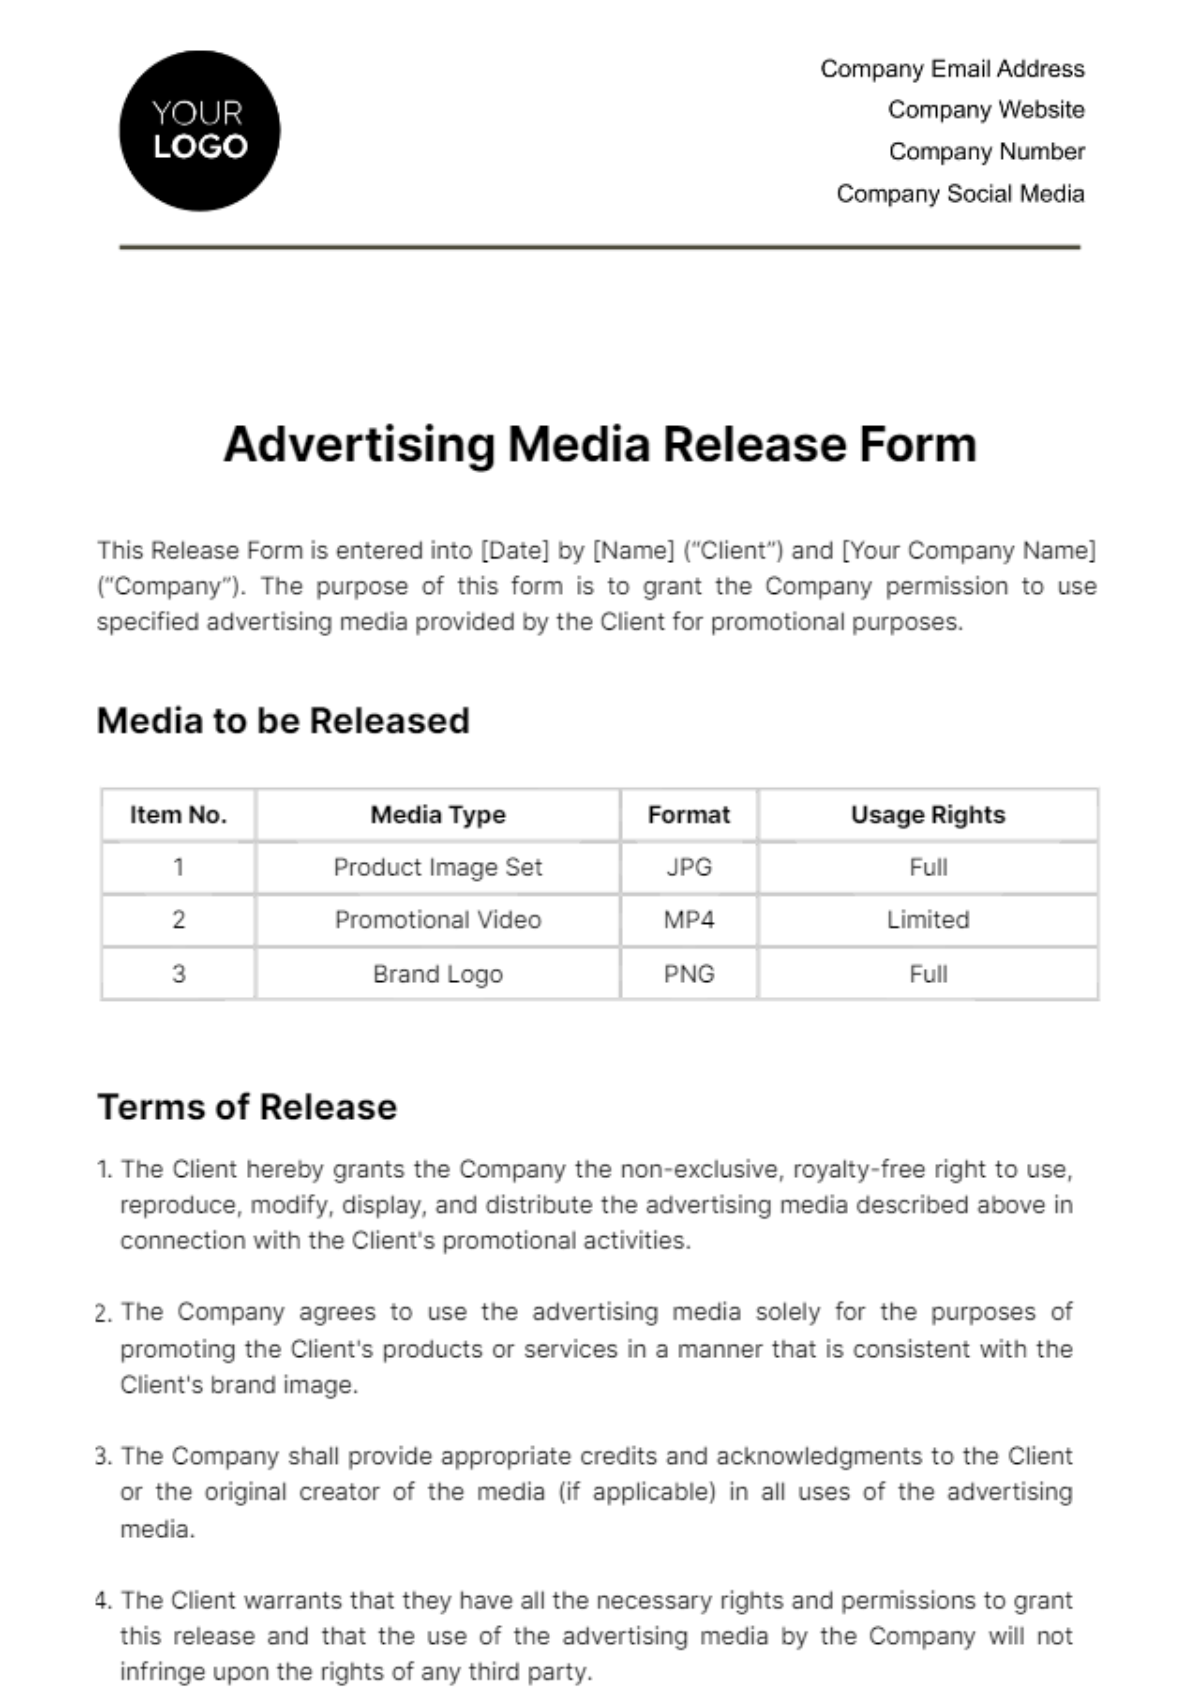 Advertising Media Release Form Template